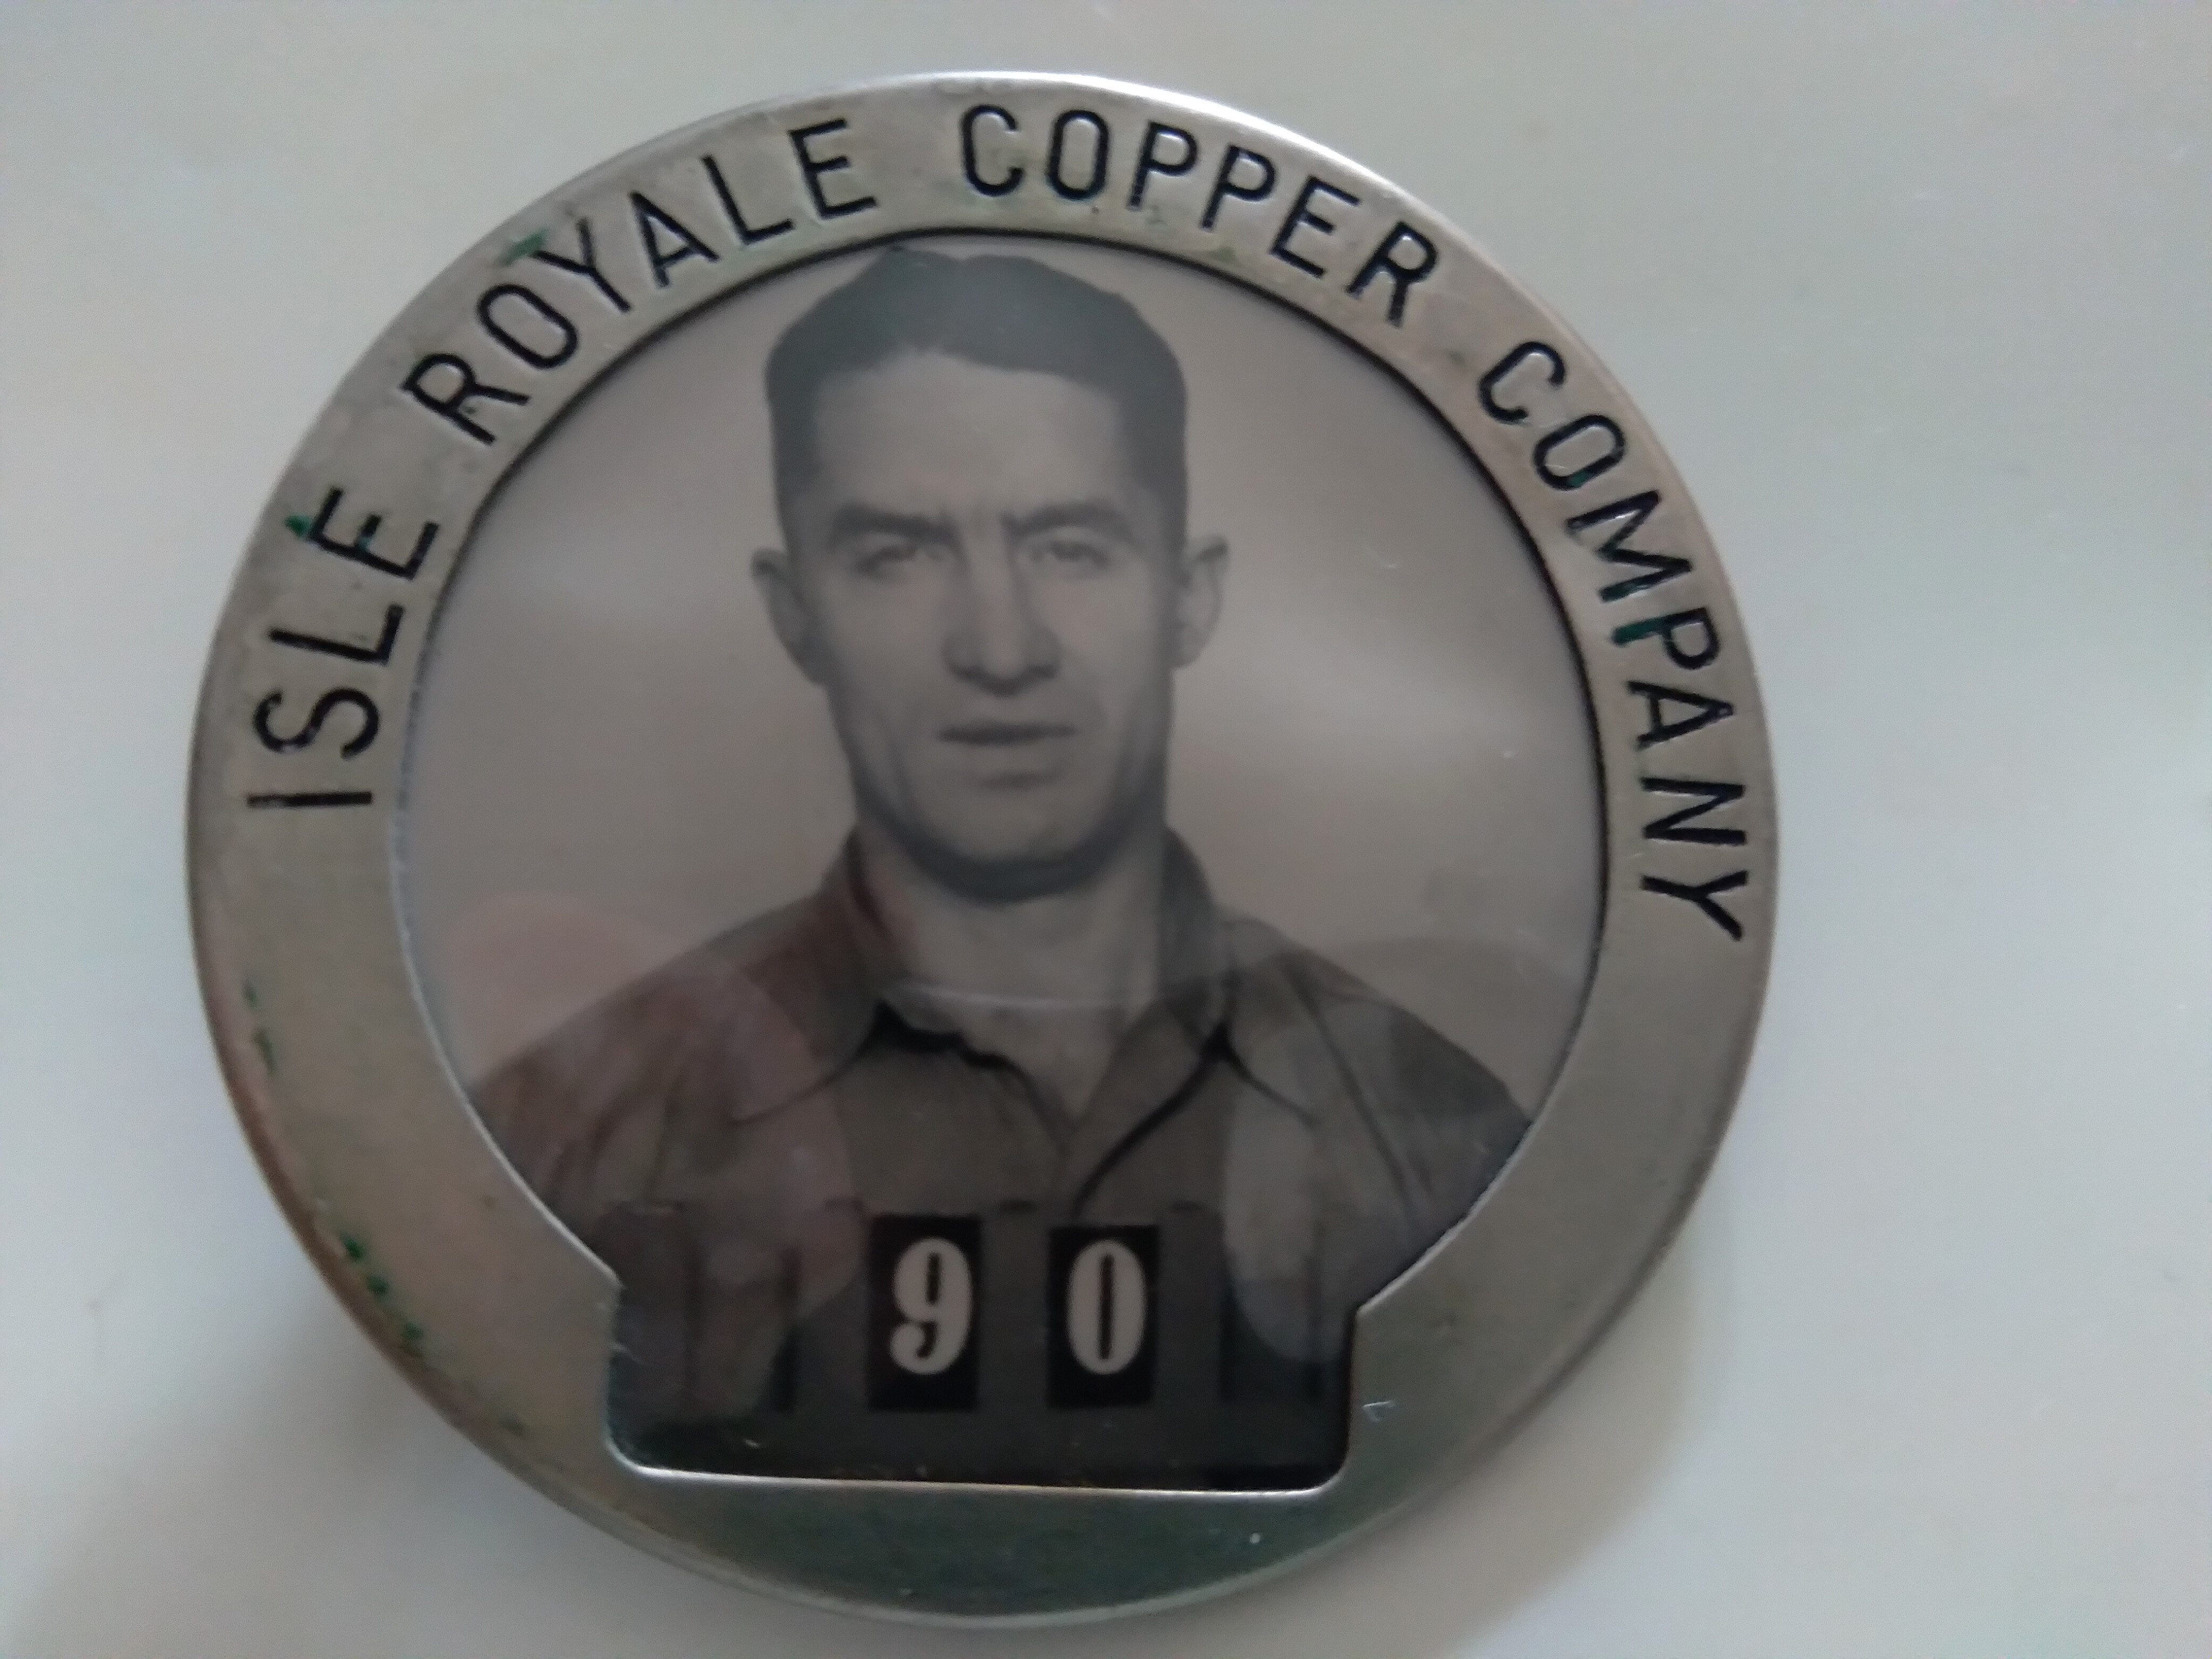 Badge from the copper mines.